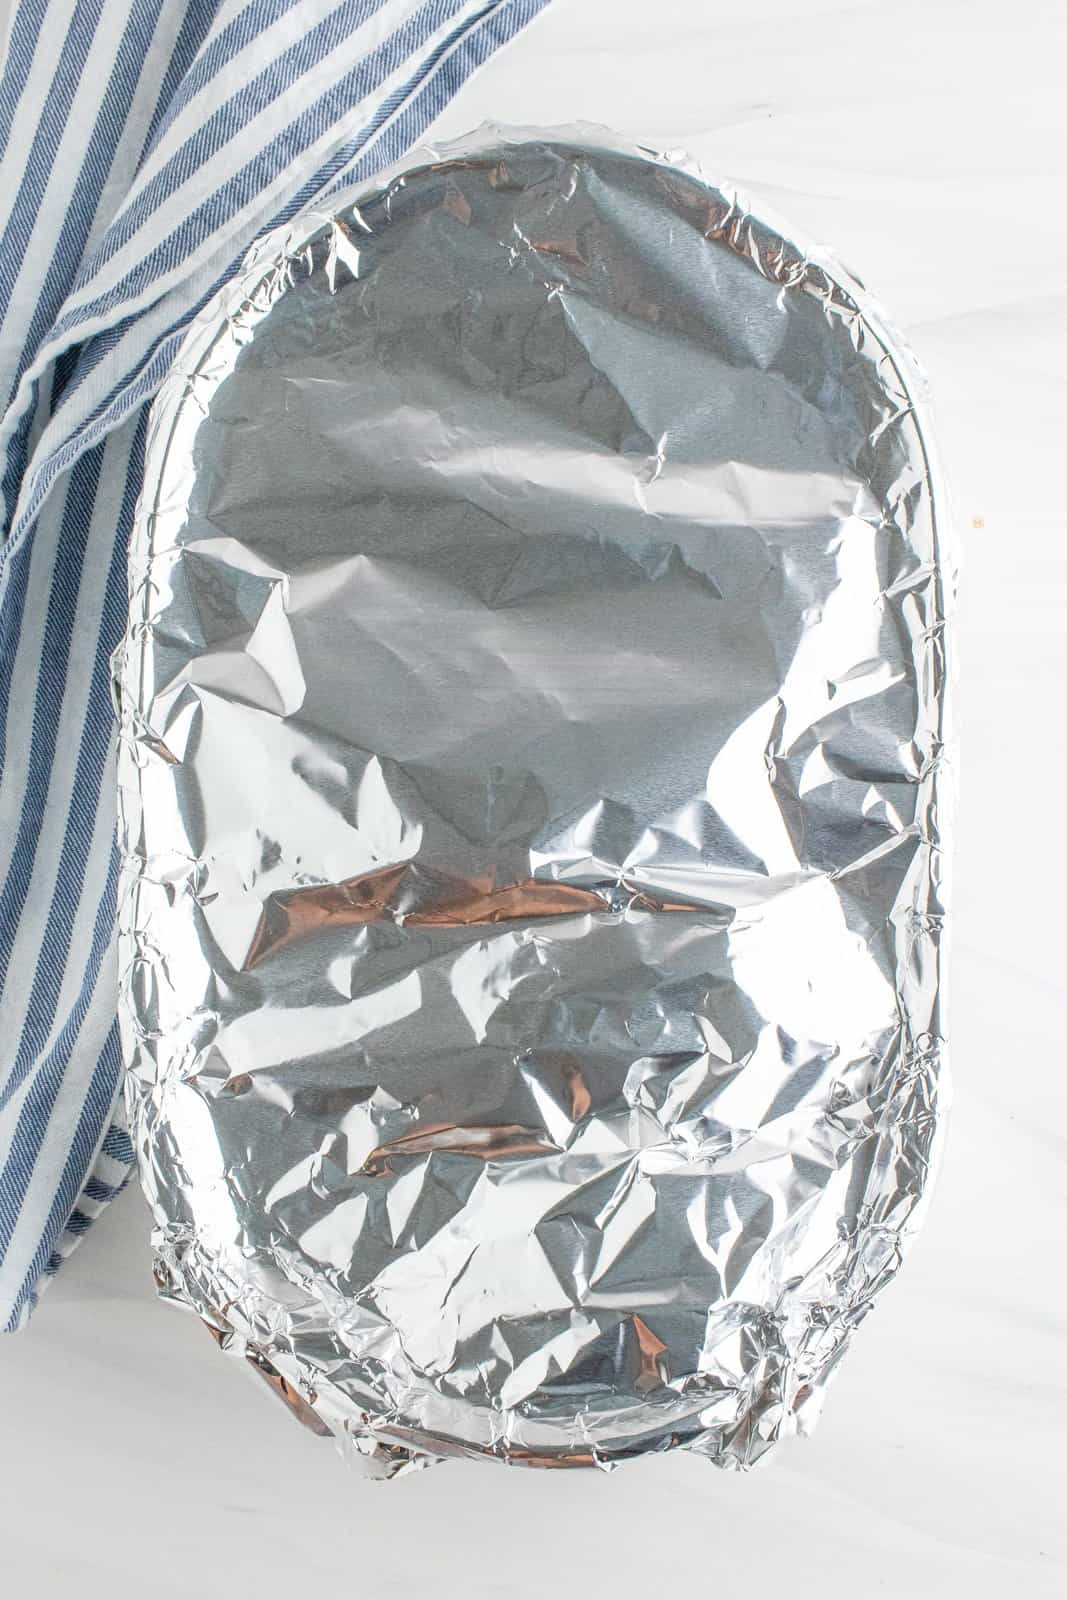 baking dish shown covered in aluminum foil. 